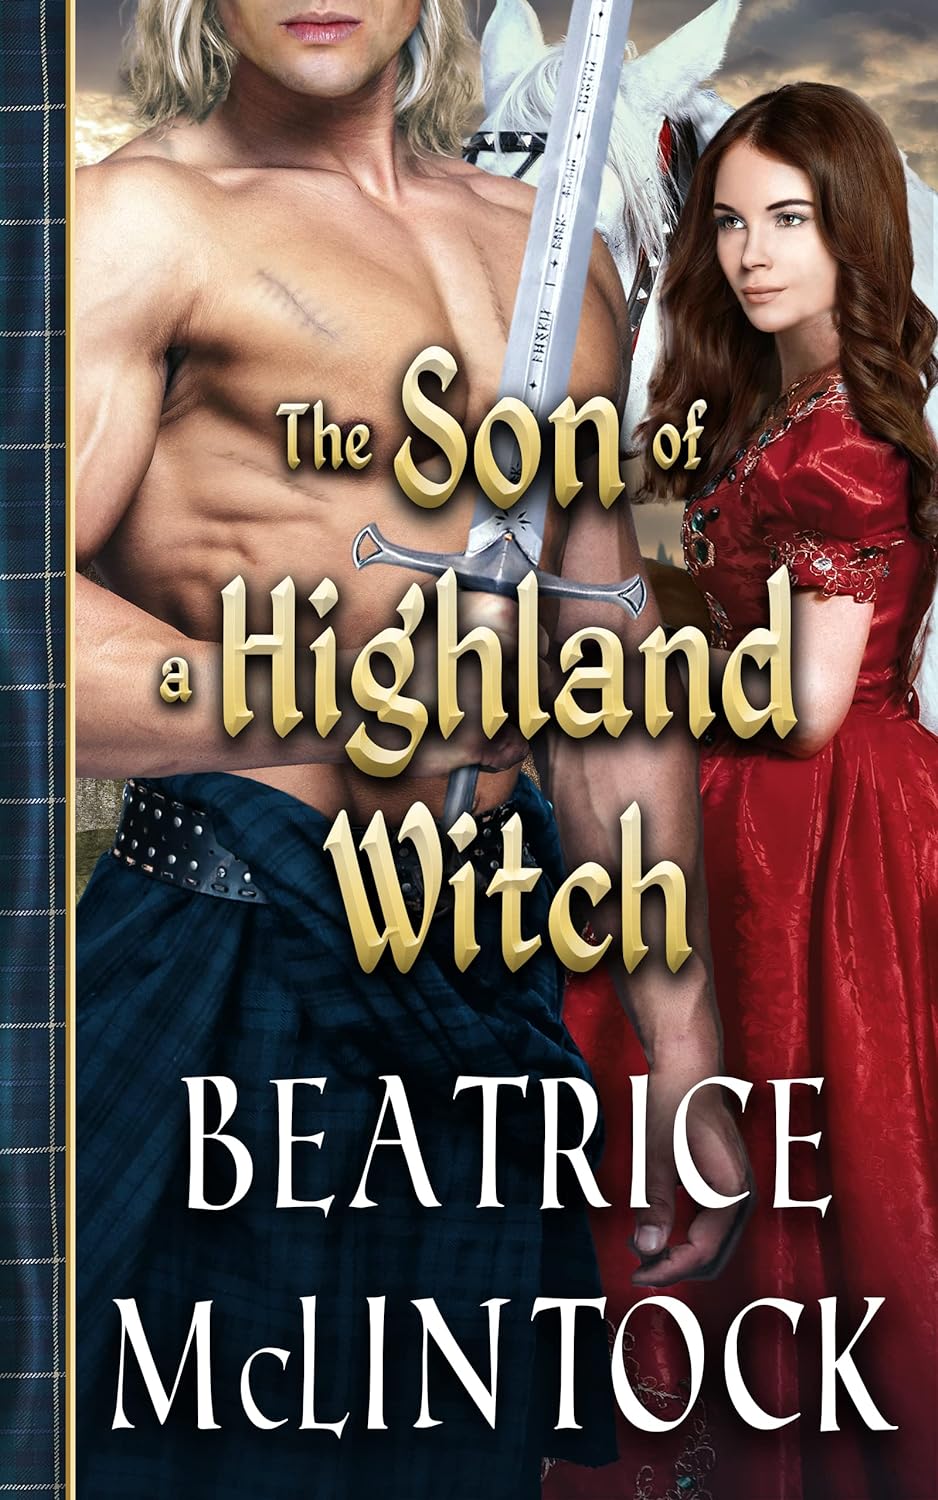 The Son of a Highland Witch